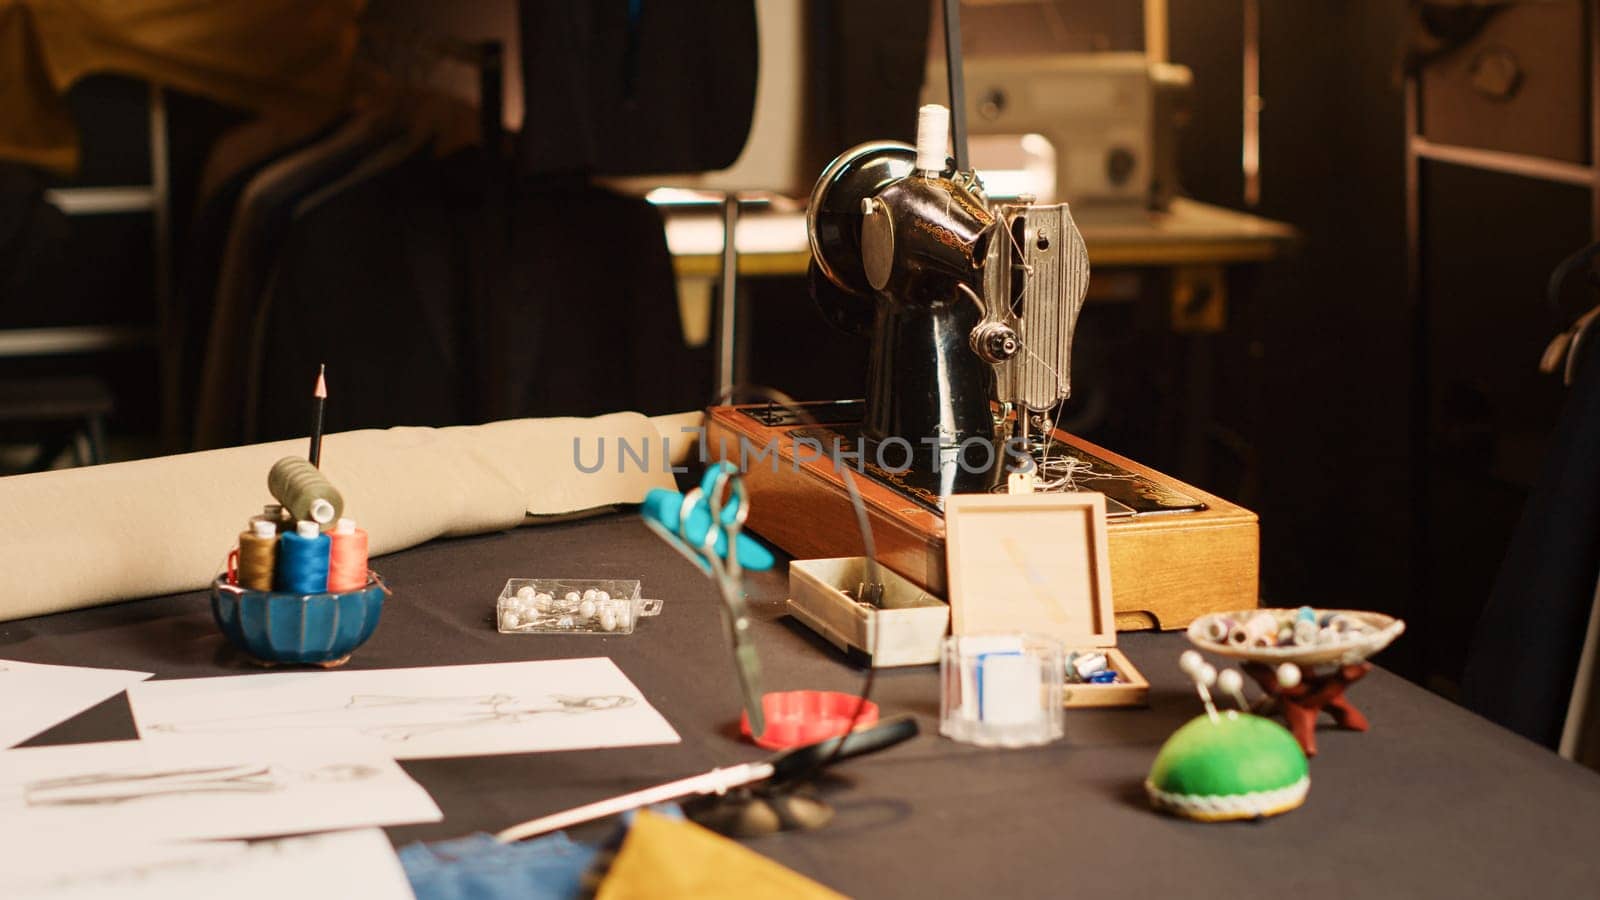 Industrial sewing machine and needles in fashion atelier, luxury craftsmanship with tailoring industry tools in workshop. Workstation with fabric and garments, manufacturing process. Close up.